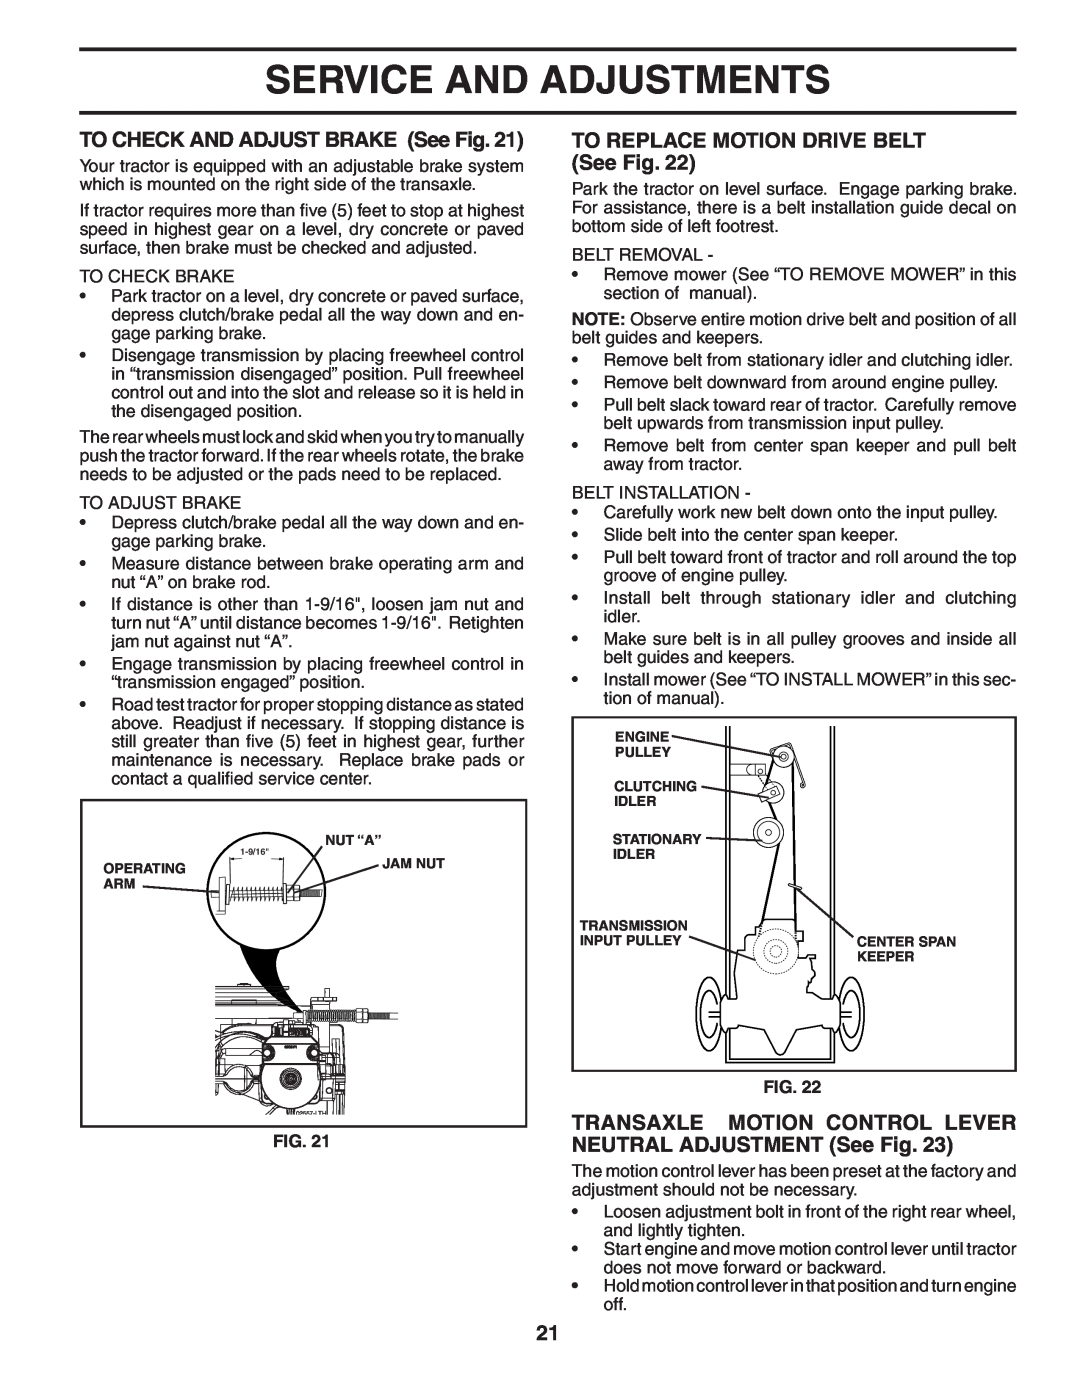 Poulan 194992 TO CHECK AND ADJUST BRAKE See Fig, TO REPLACE MOTION DRIVE BELT See Fig, Service And Adjustments, Nut “A” 